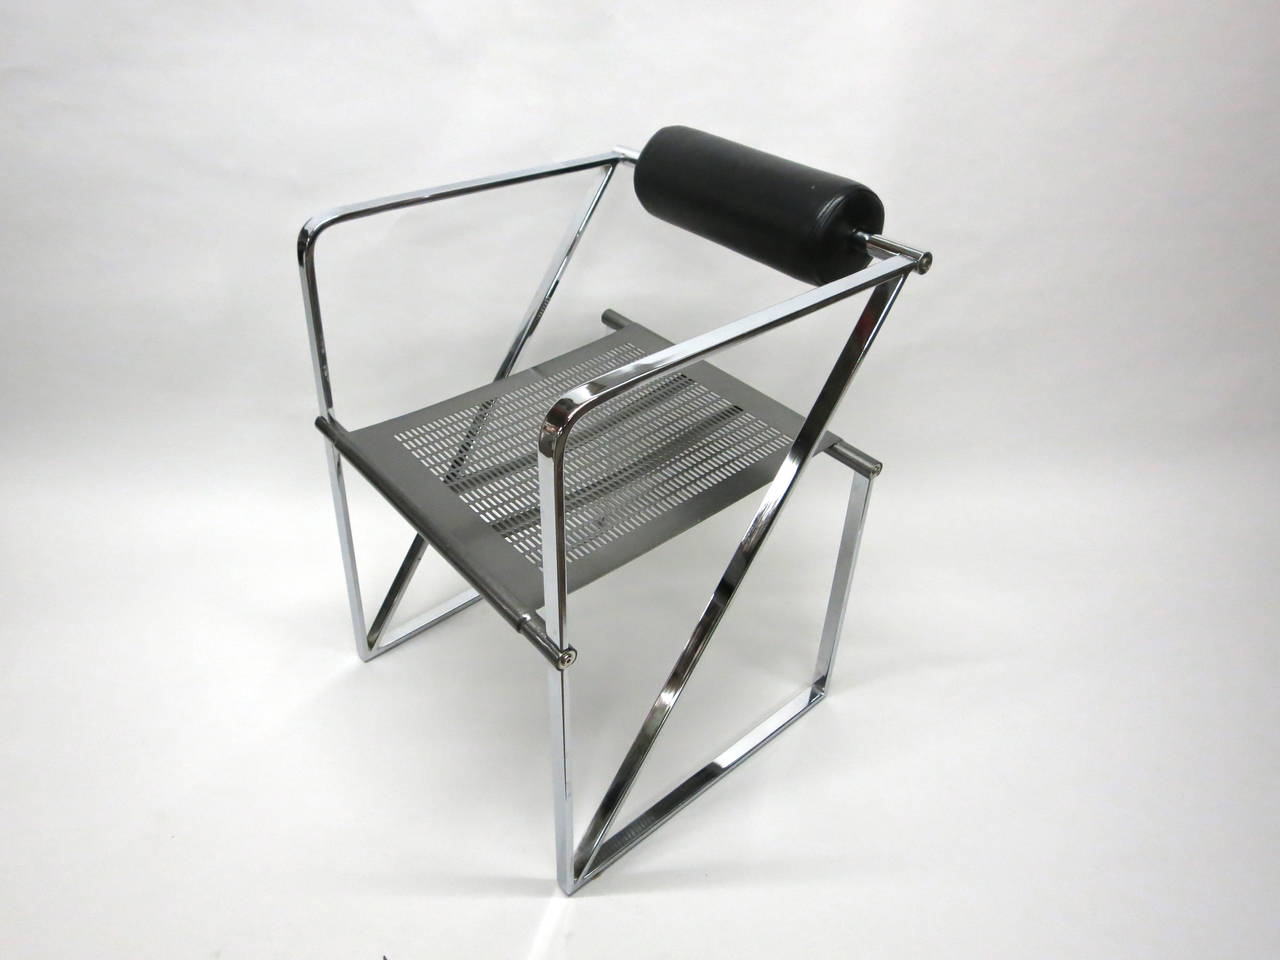 Modern Pair of Chairs by Mario Botta, Steel and Leather, circa 1980, Made in Italy